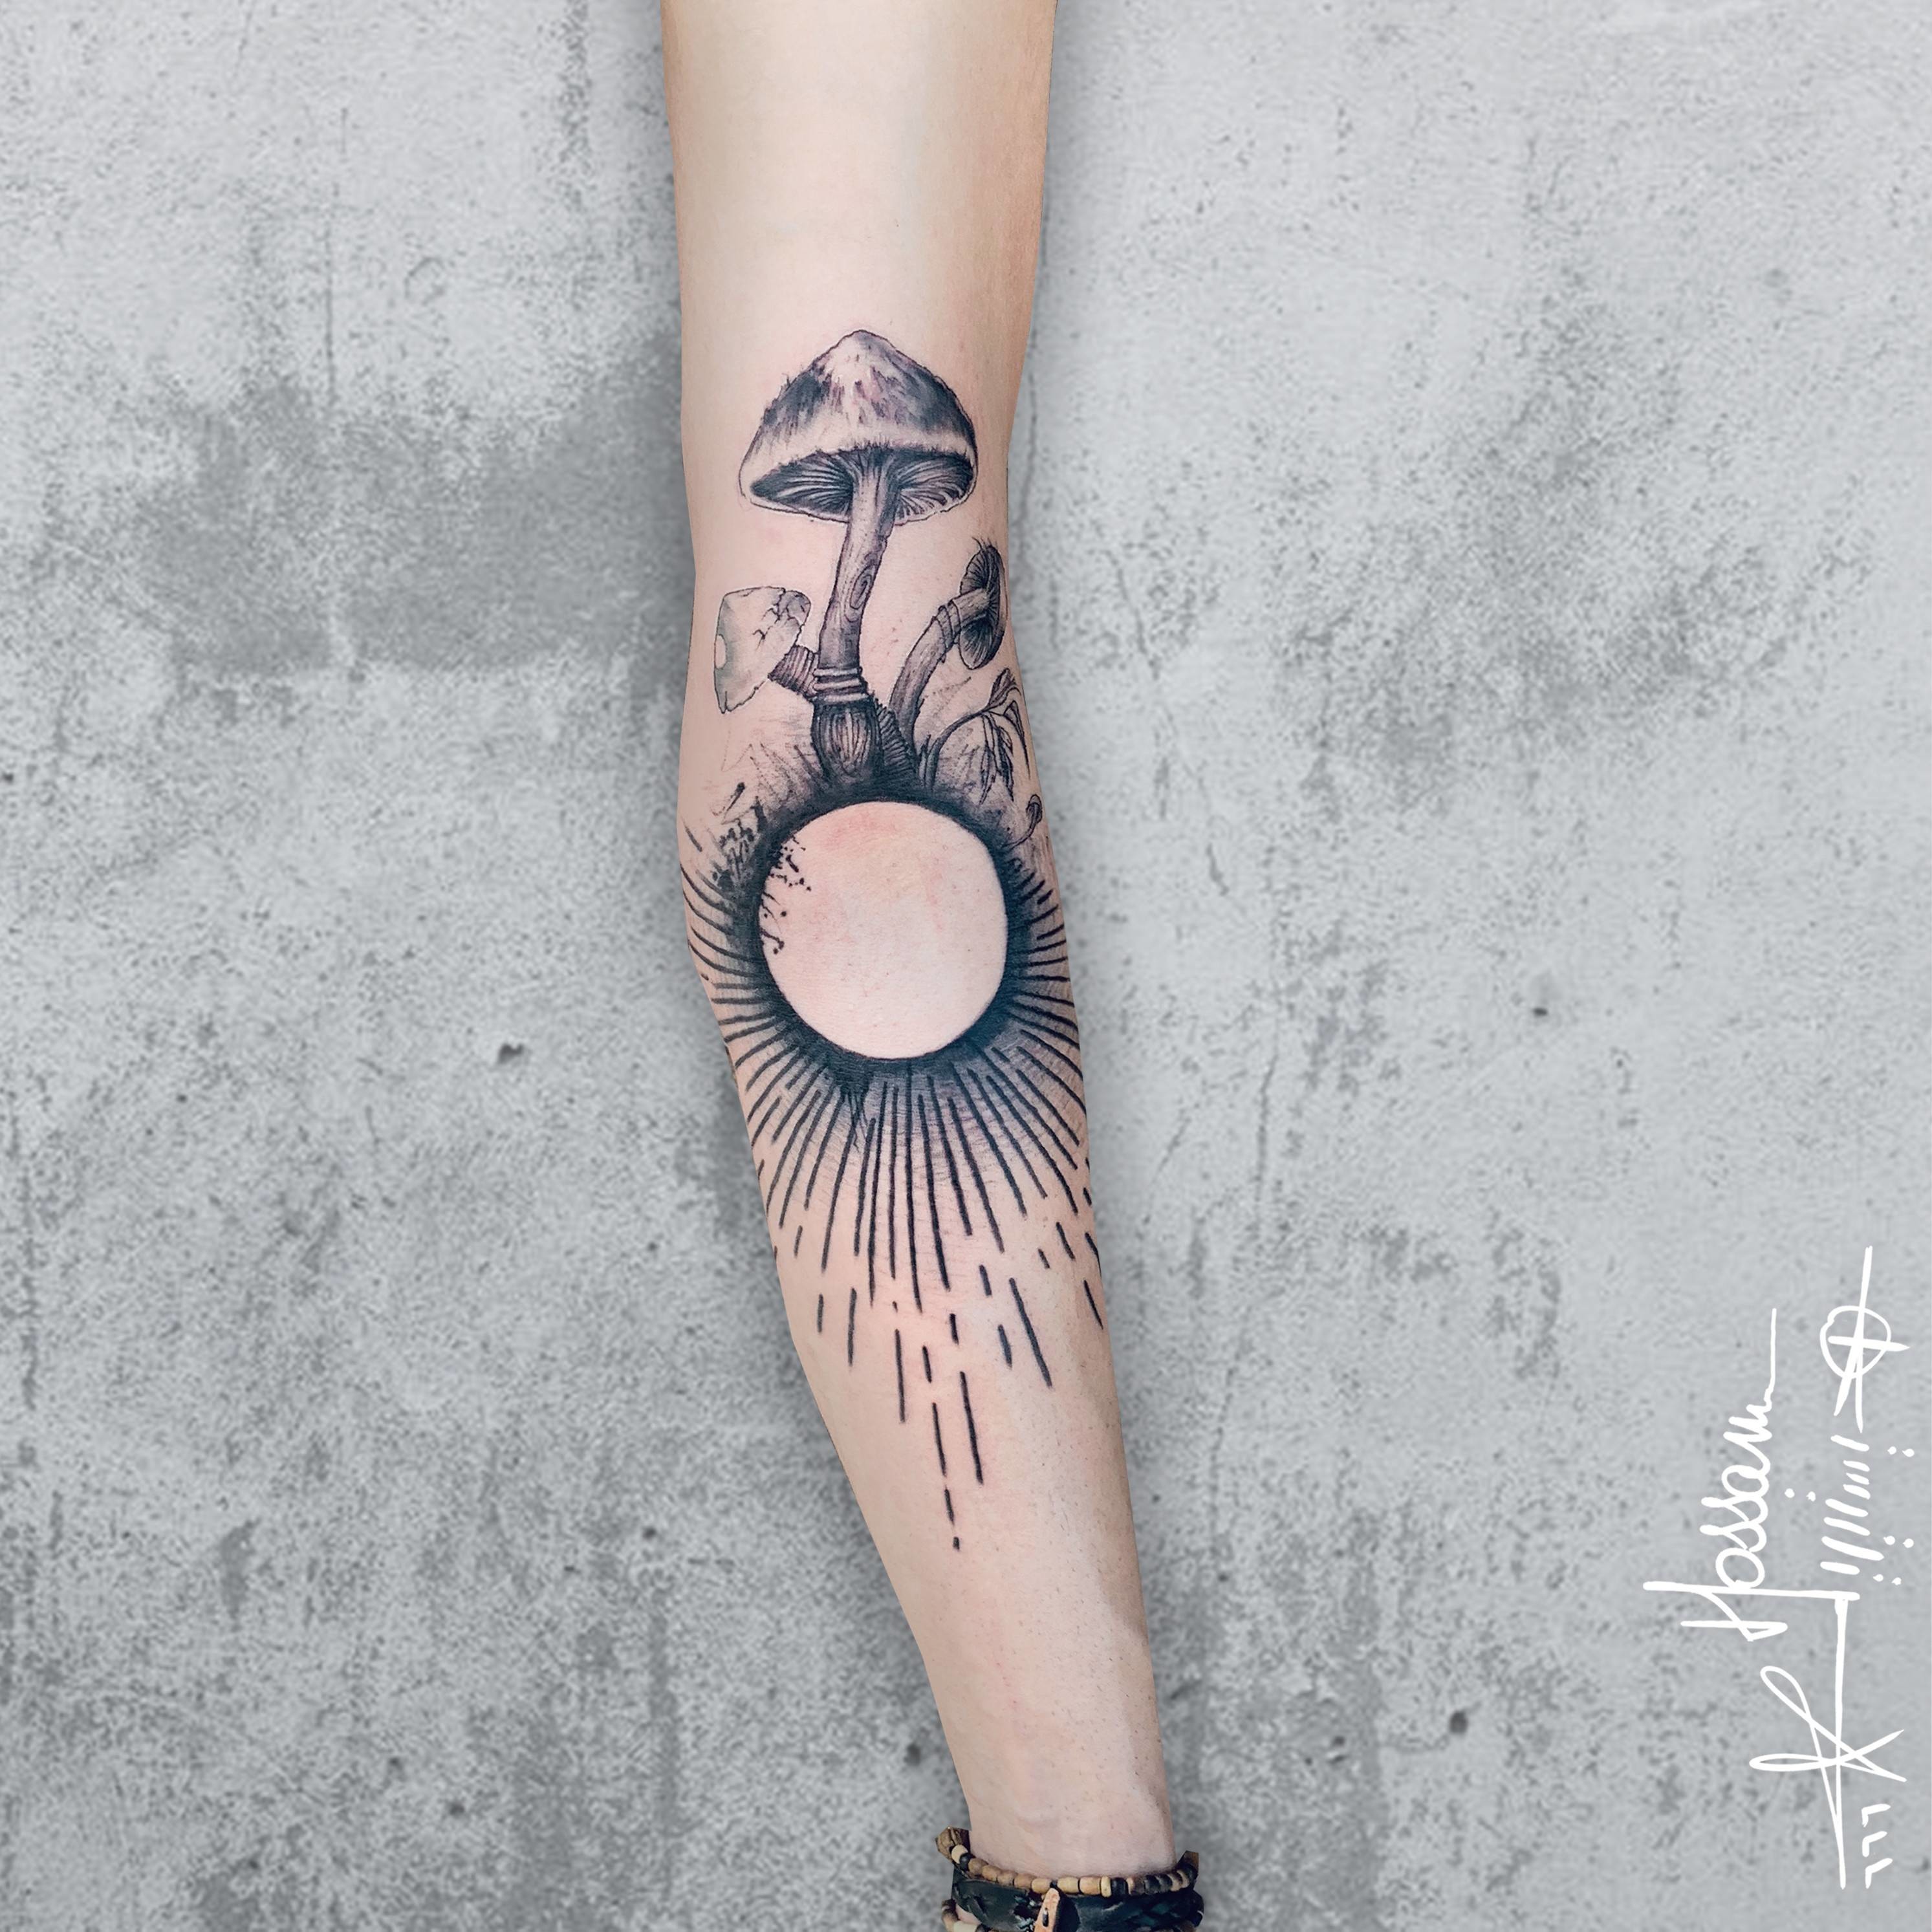 TatMasters - Read everything about Black & Grey tattoos